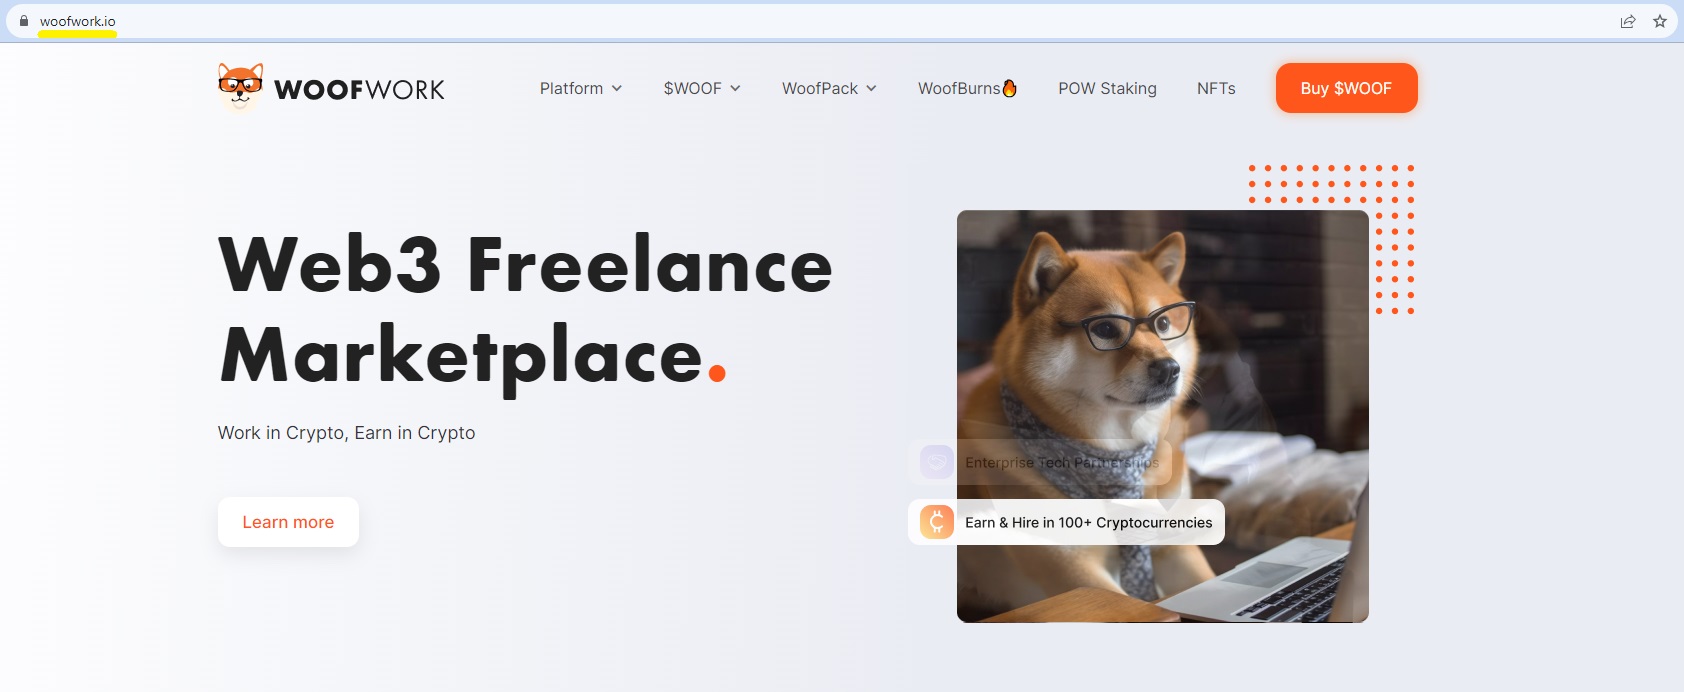 official website of the WoofWork crypto project